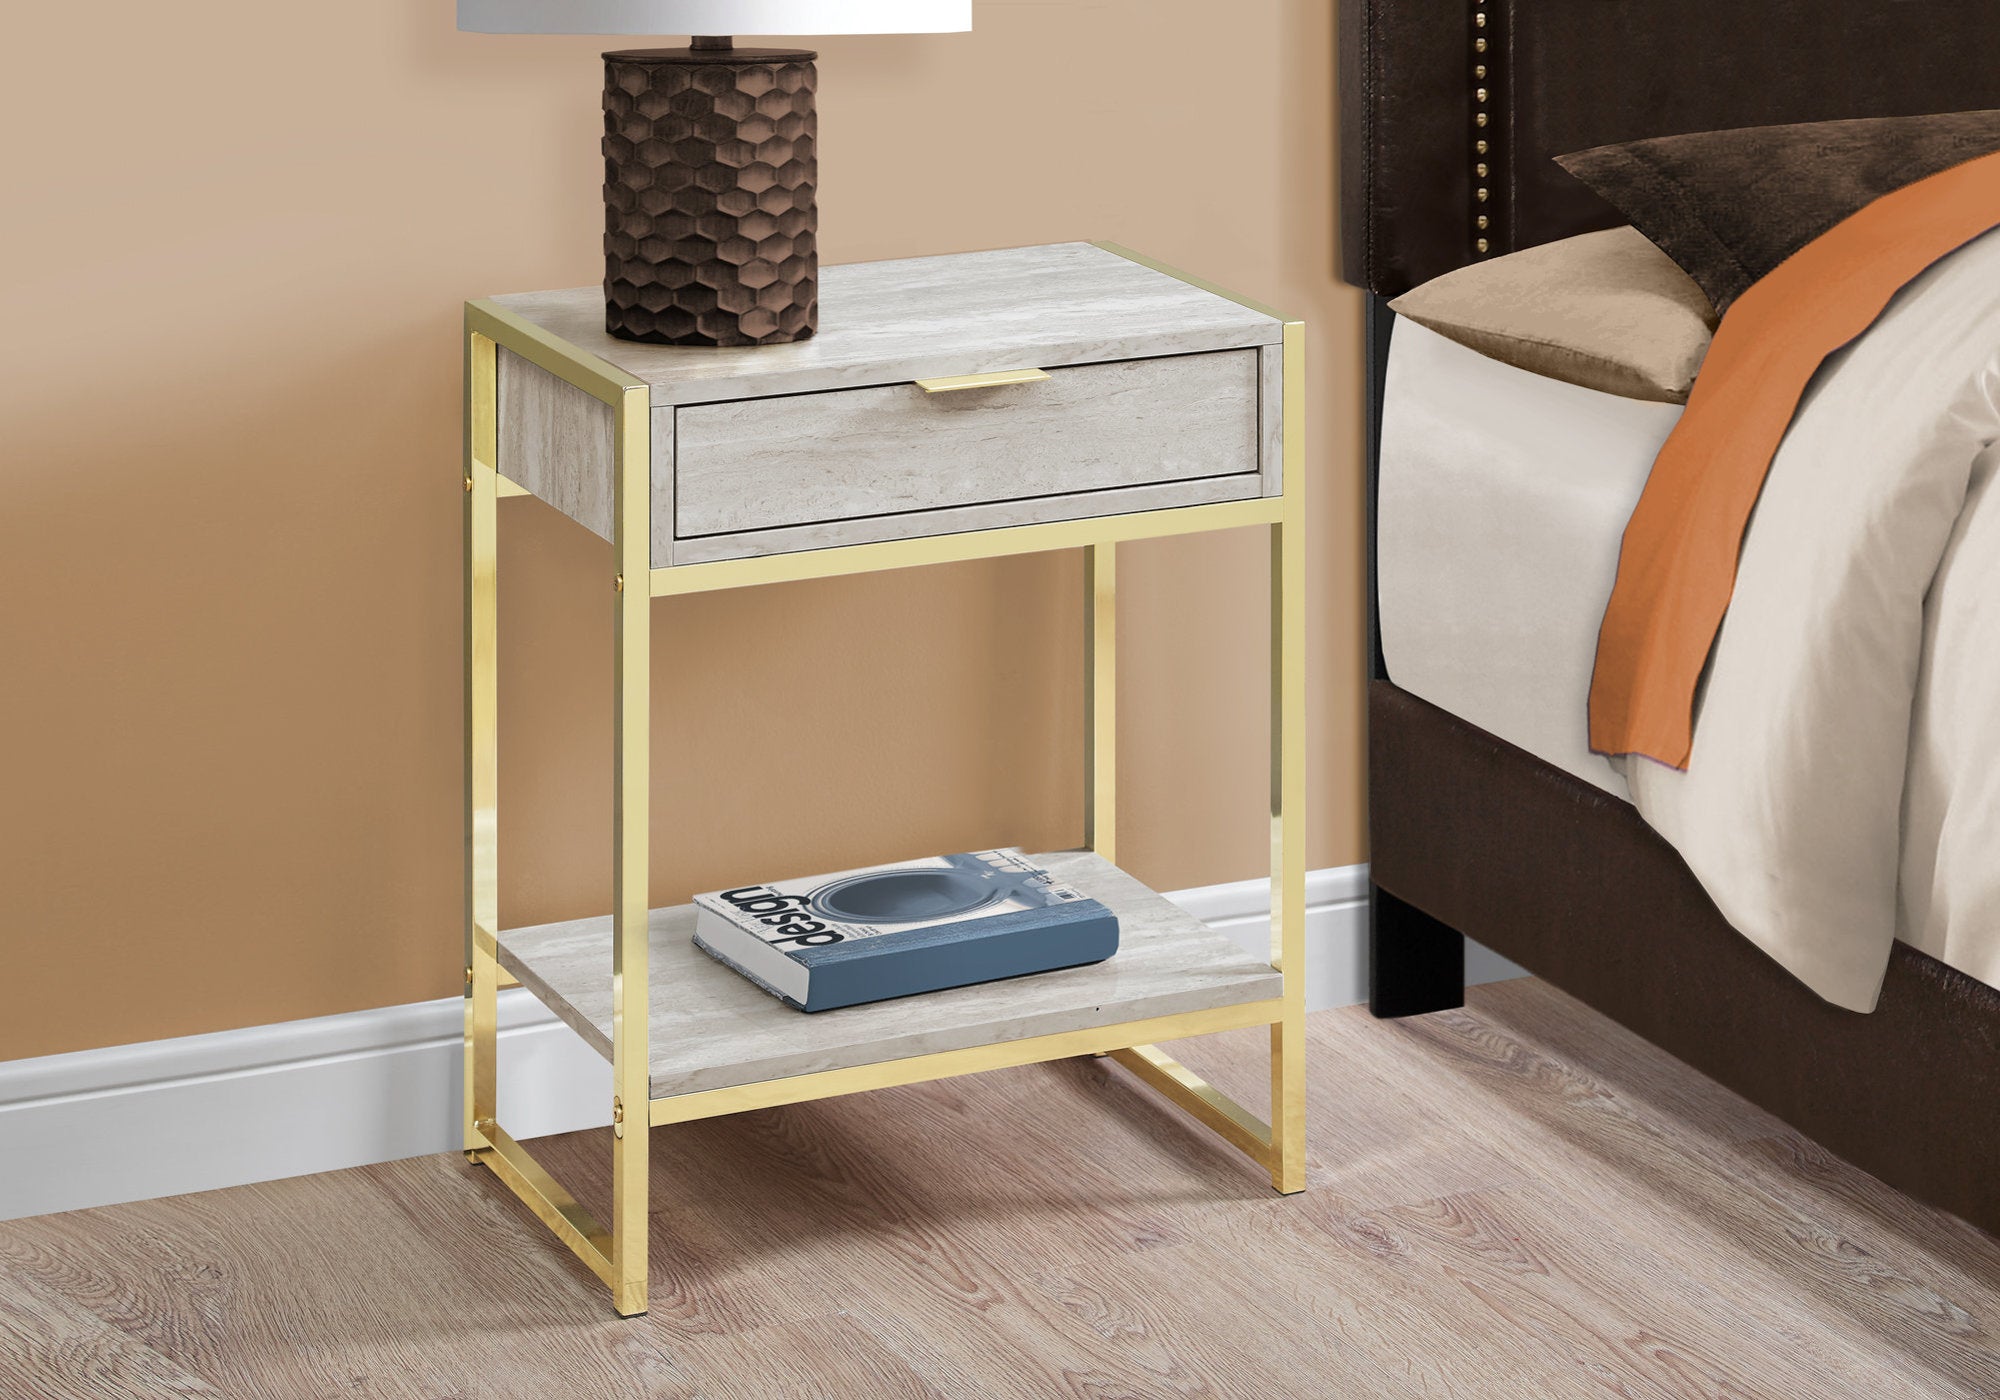 MN-903483    Accent Table, Side, End, Nightstand, Lamp, Living Room, Bedroom, Metal Legs, Laminate, Beige Marble, Gold, Contemporary, Modern